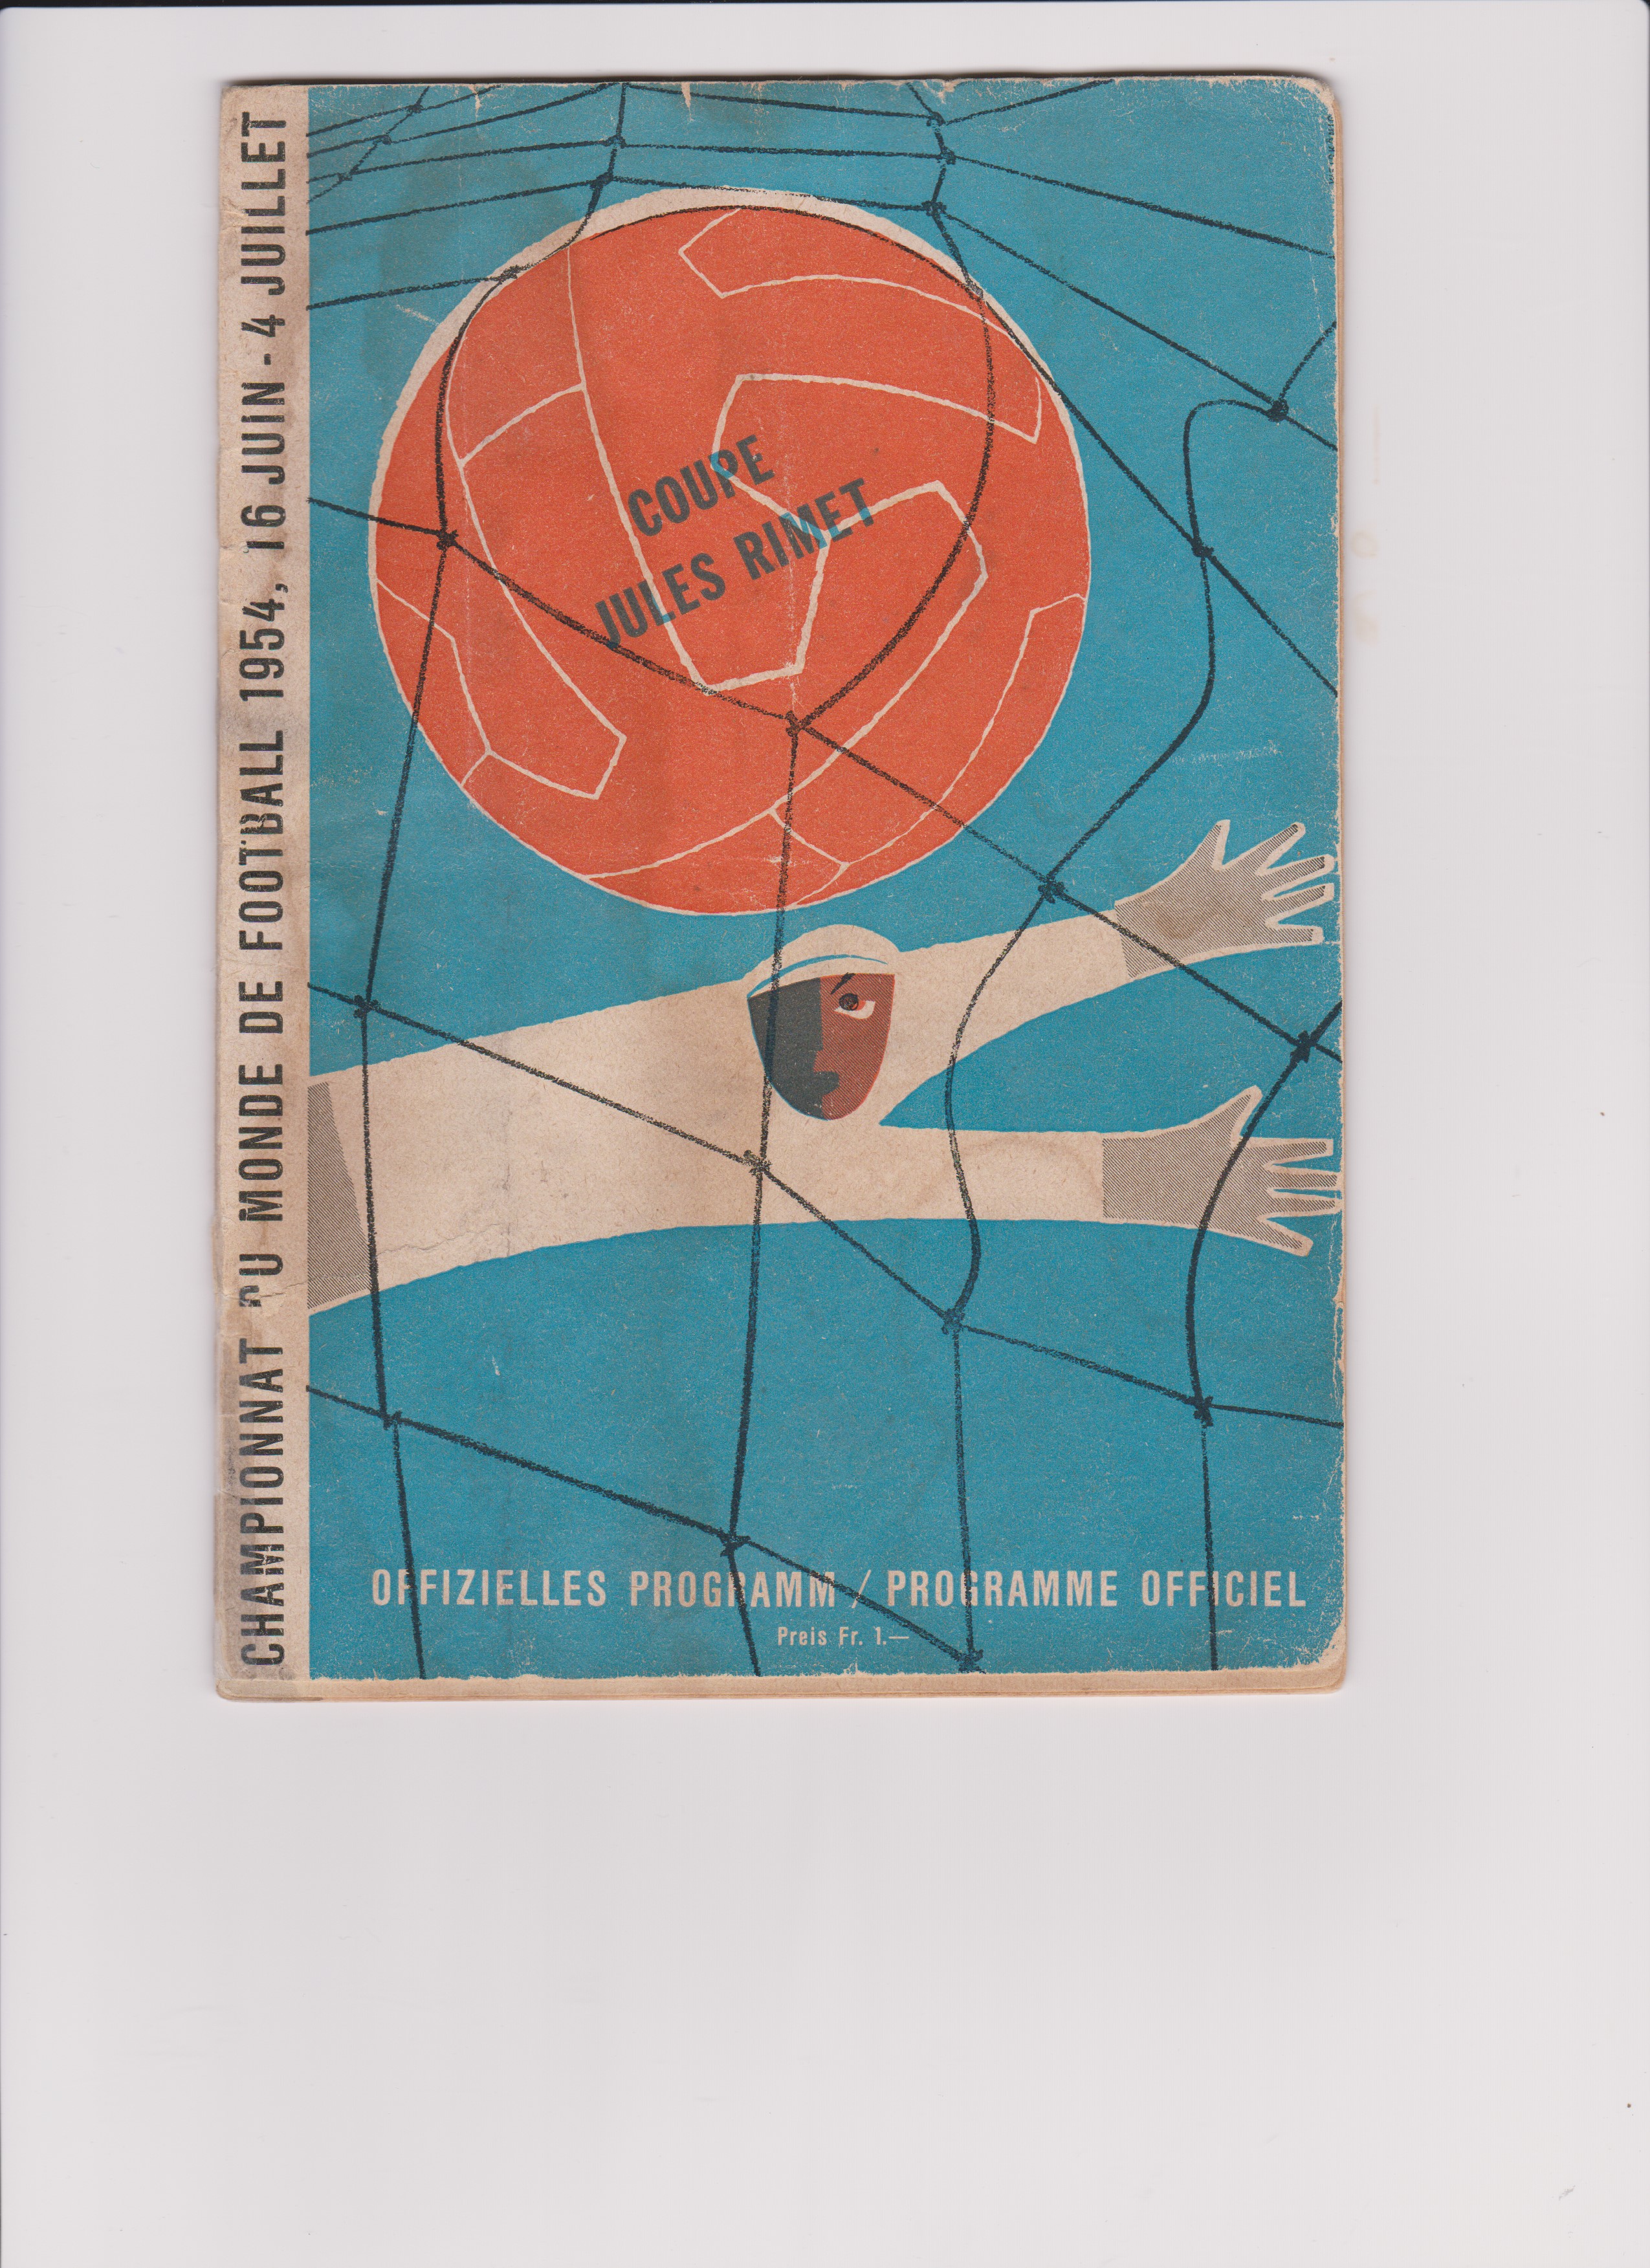 Programme Uruguay v Hungary World Cup Semi Final in Lausanne 30th June 1954. Detached cover with